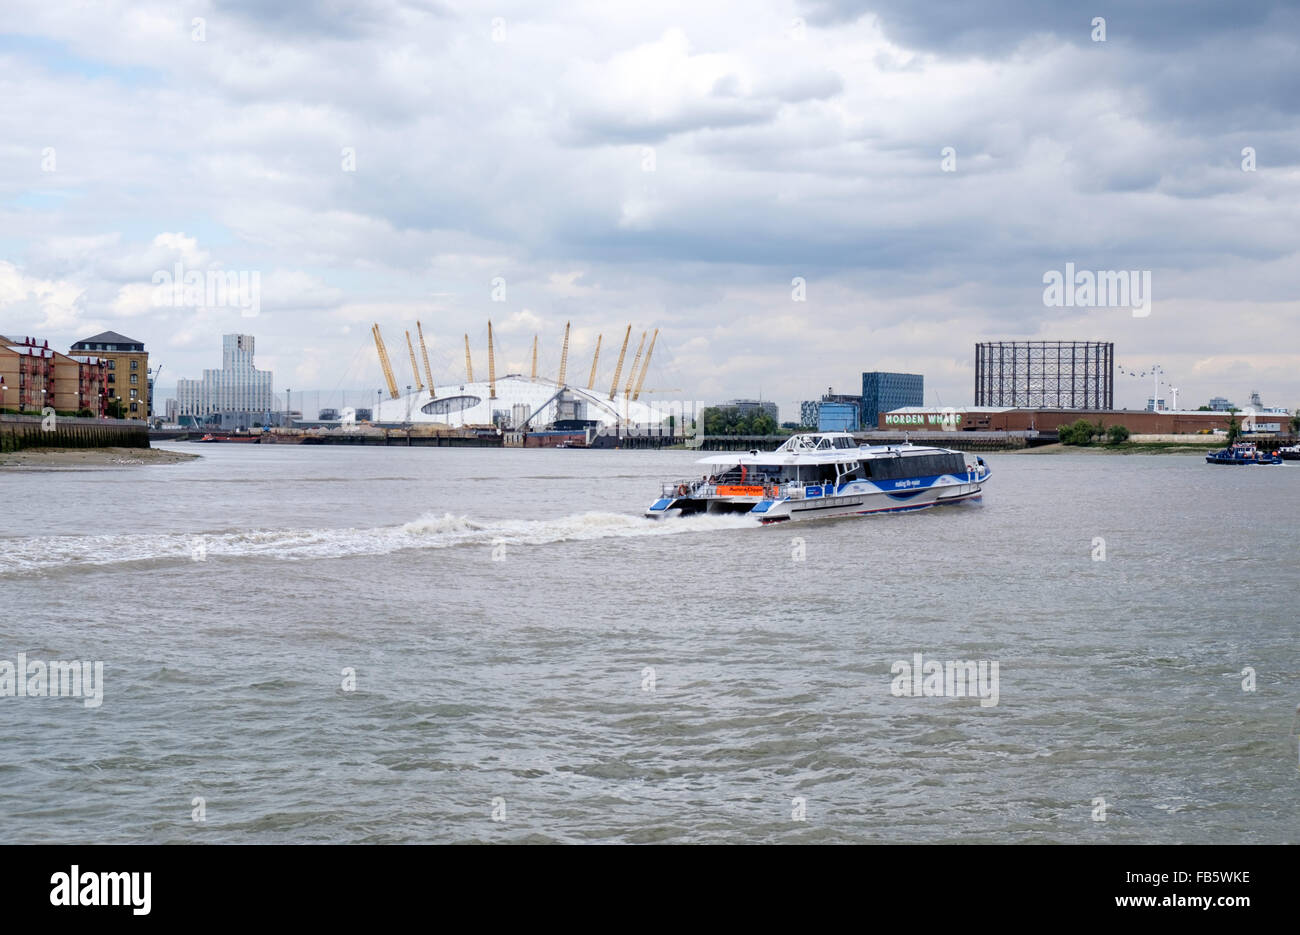 Millennium Dome (the O2 Arena) on the Greenwich peninsula, UK, seen from the River Thames Stock Photo